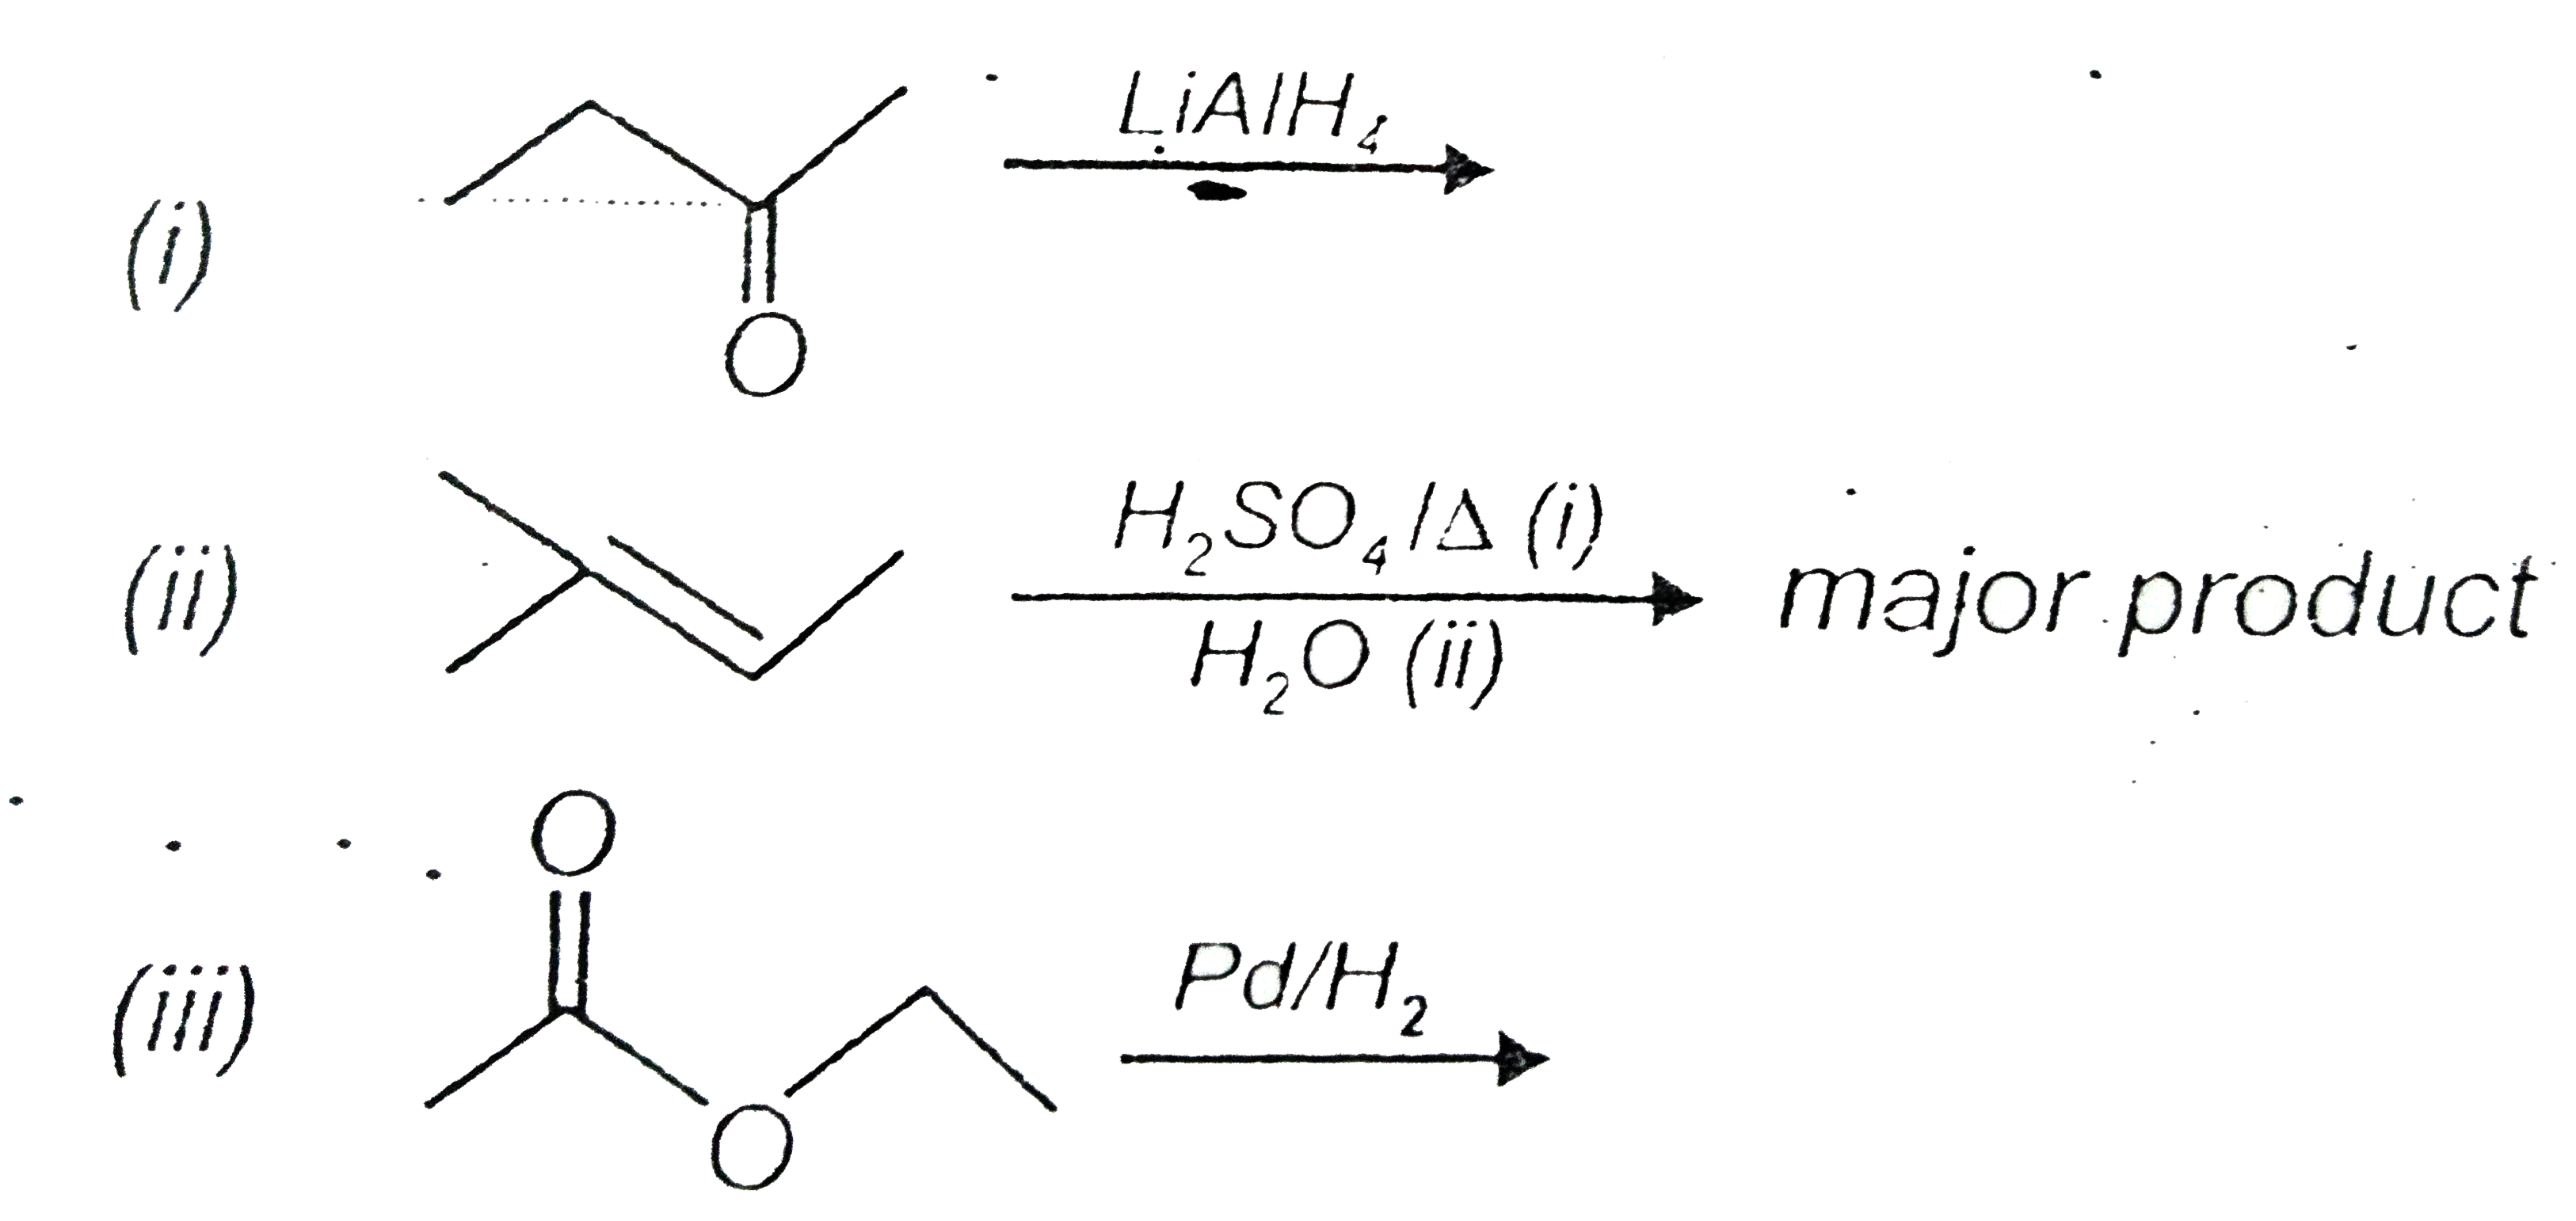 Give  IUPAC  name of  the  expected pruduct  in the  following  reactions